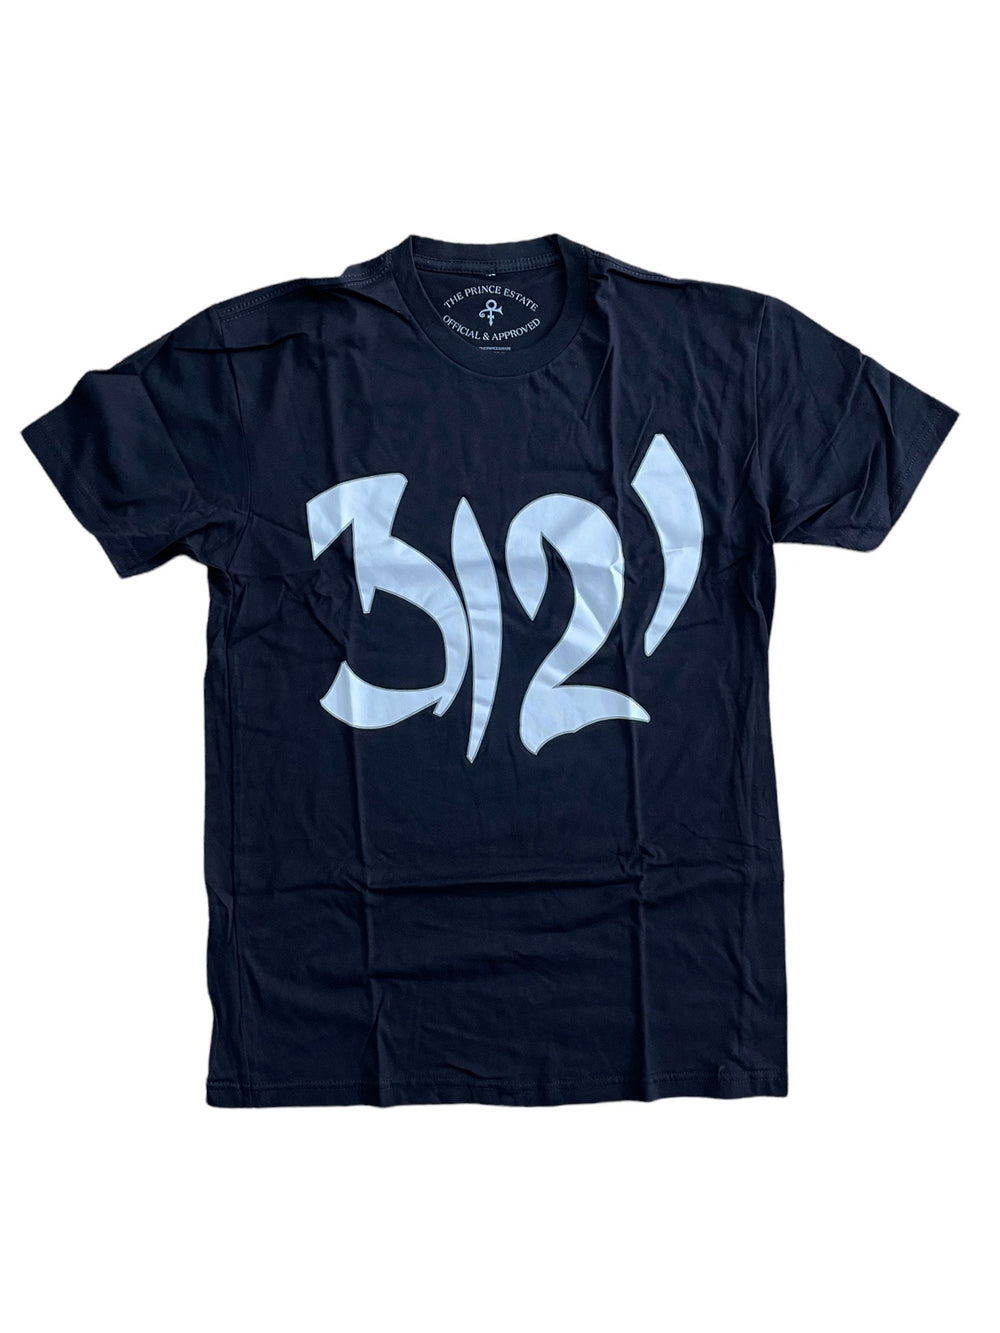 Prince – 3121 Unisex Official T Shirt Brand New Size Small